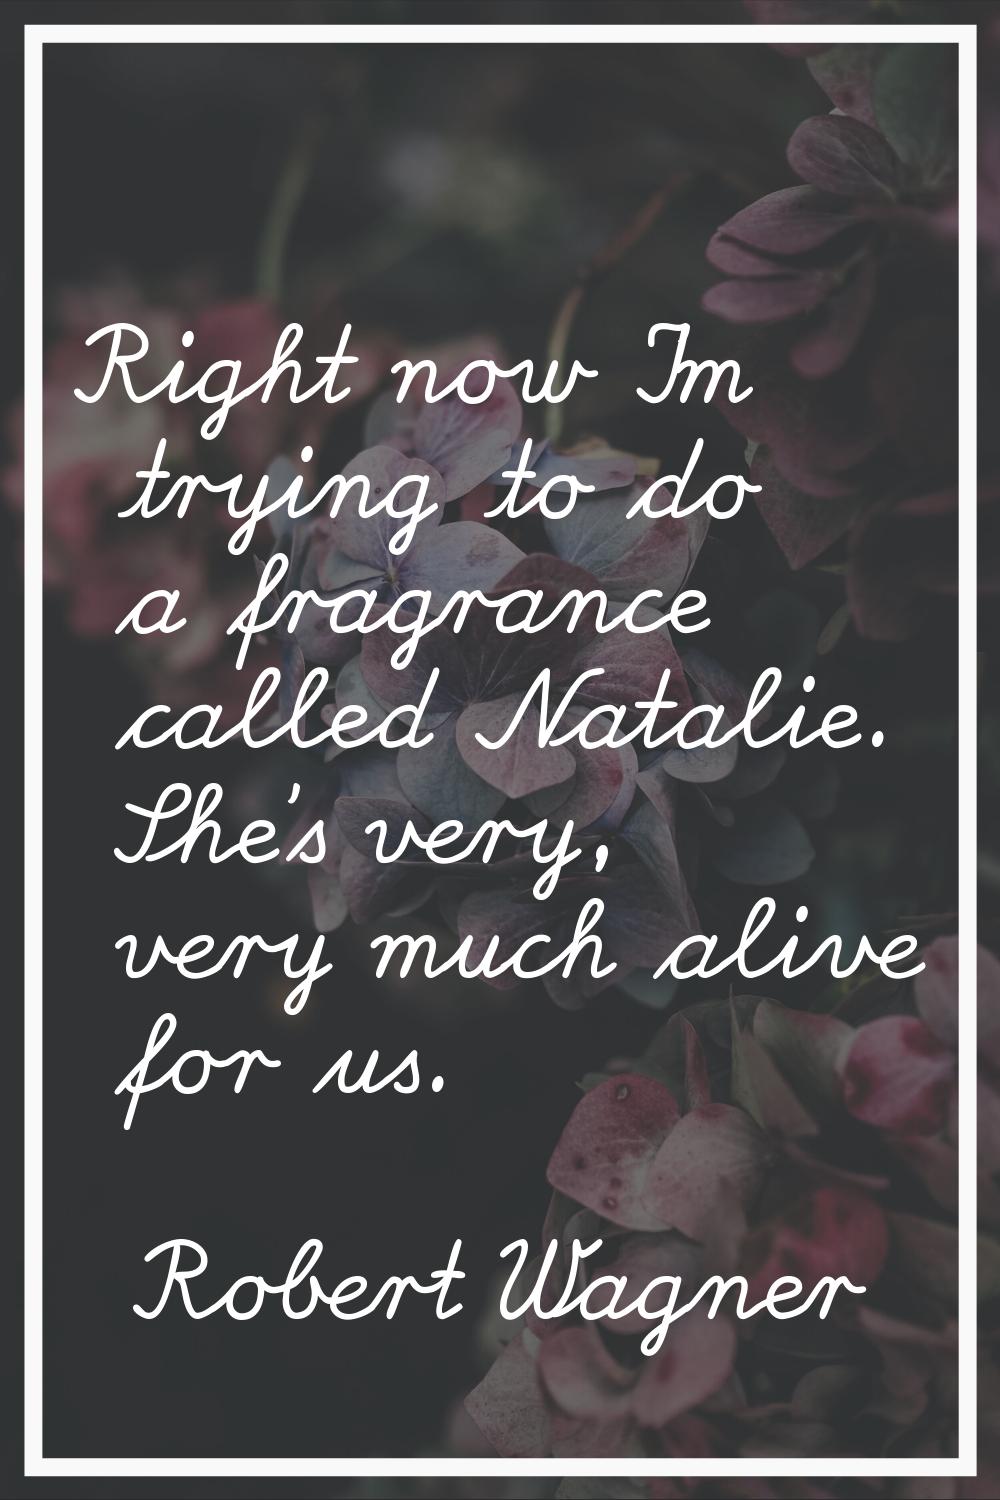 Right now I'm trying to do a fragrance called Natalie. She's very, very much alive for us.